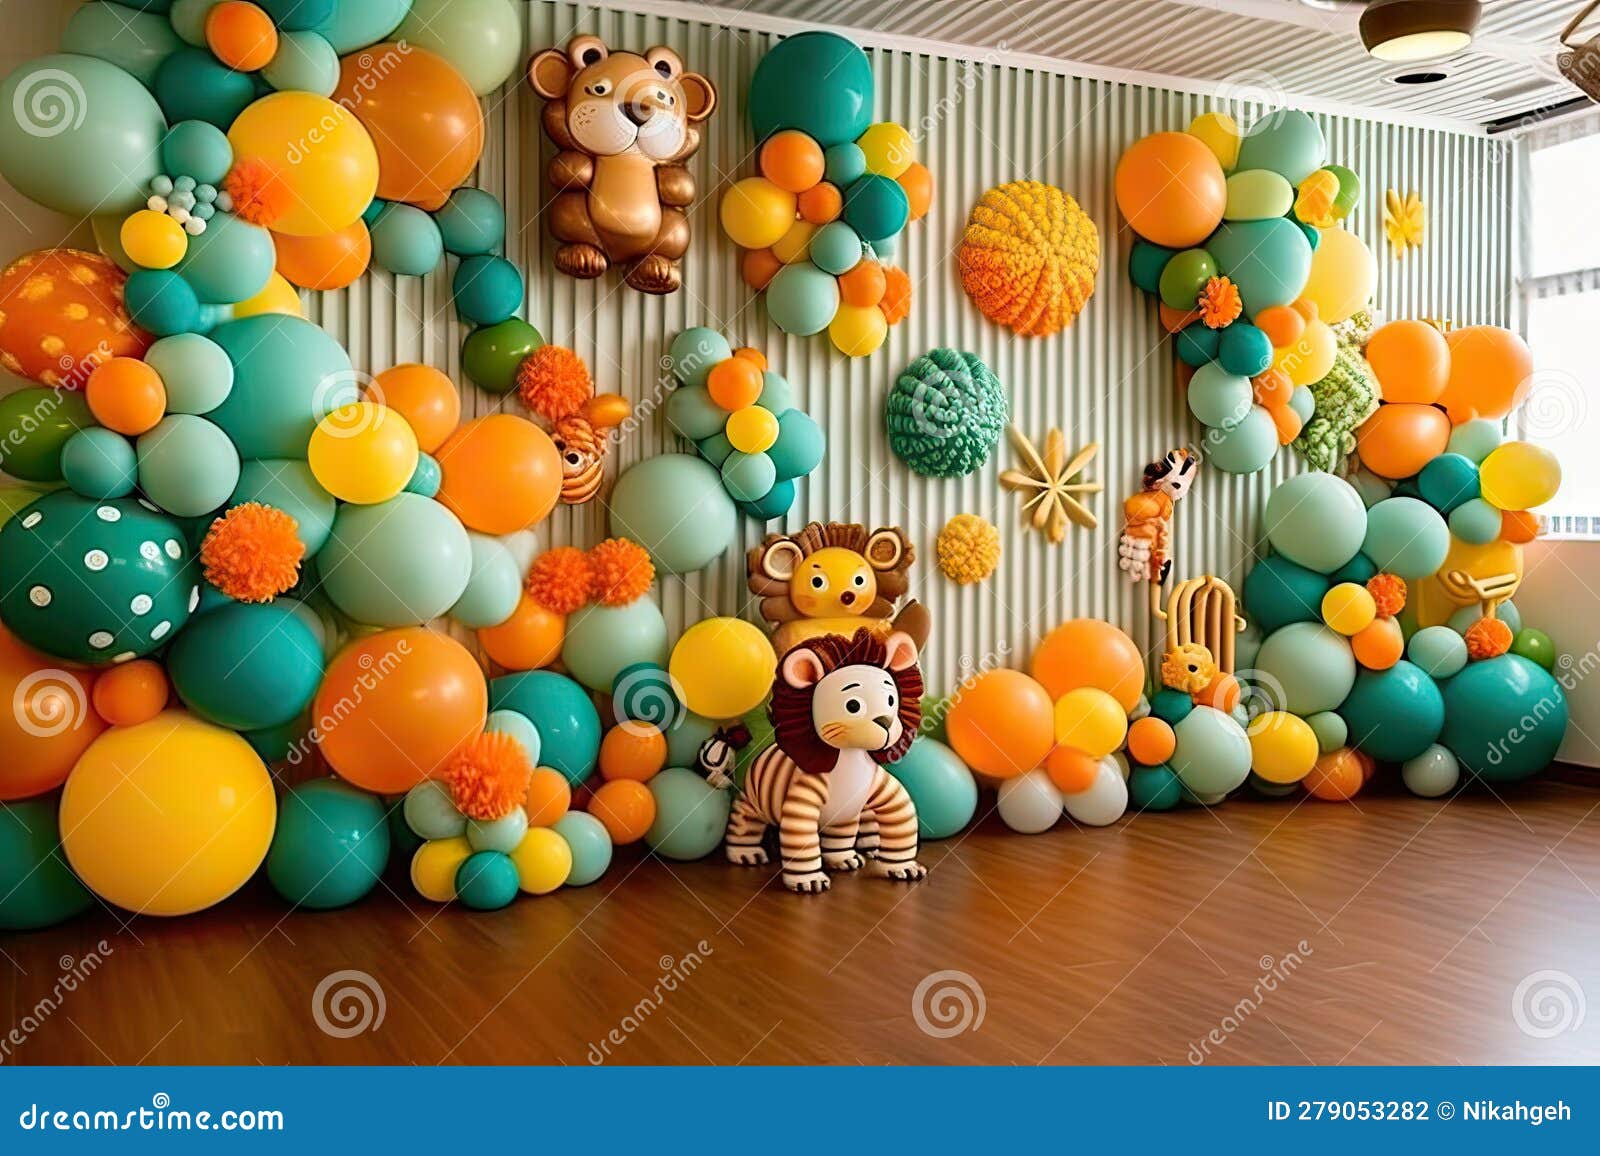 Balloon Decoration Wall Party Kids at Home Zoo Theme Ornament ...